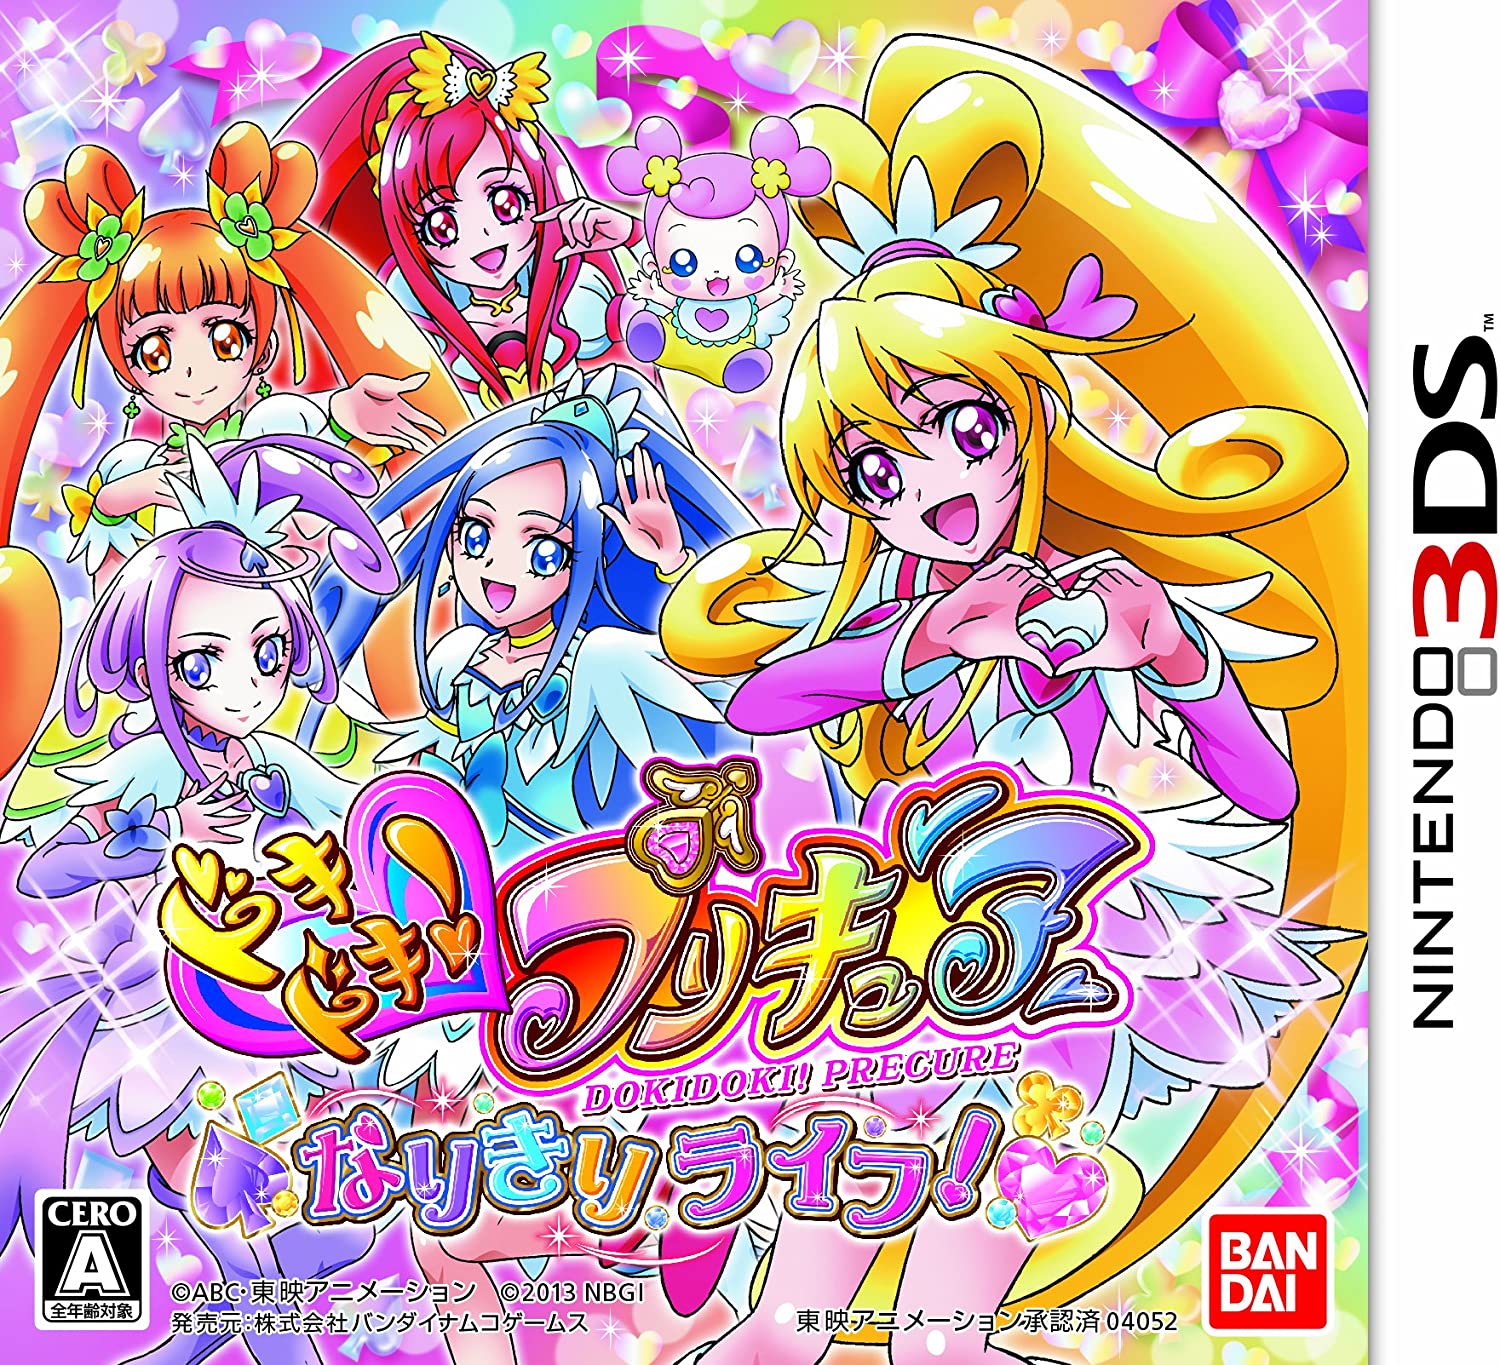 ds 3ds プリキュア ソフト まとめ売り | kensysgas.com